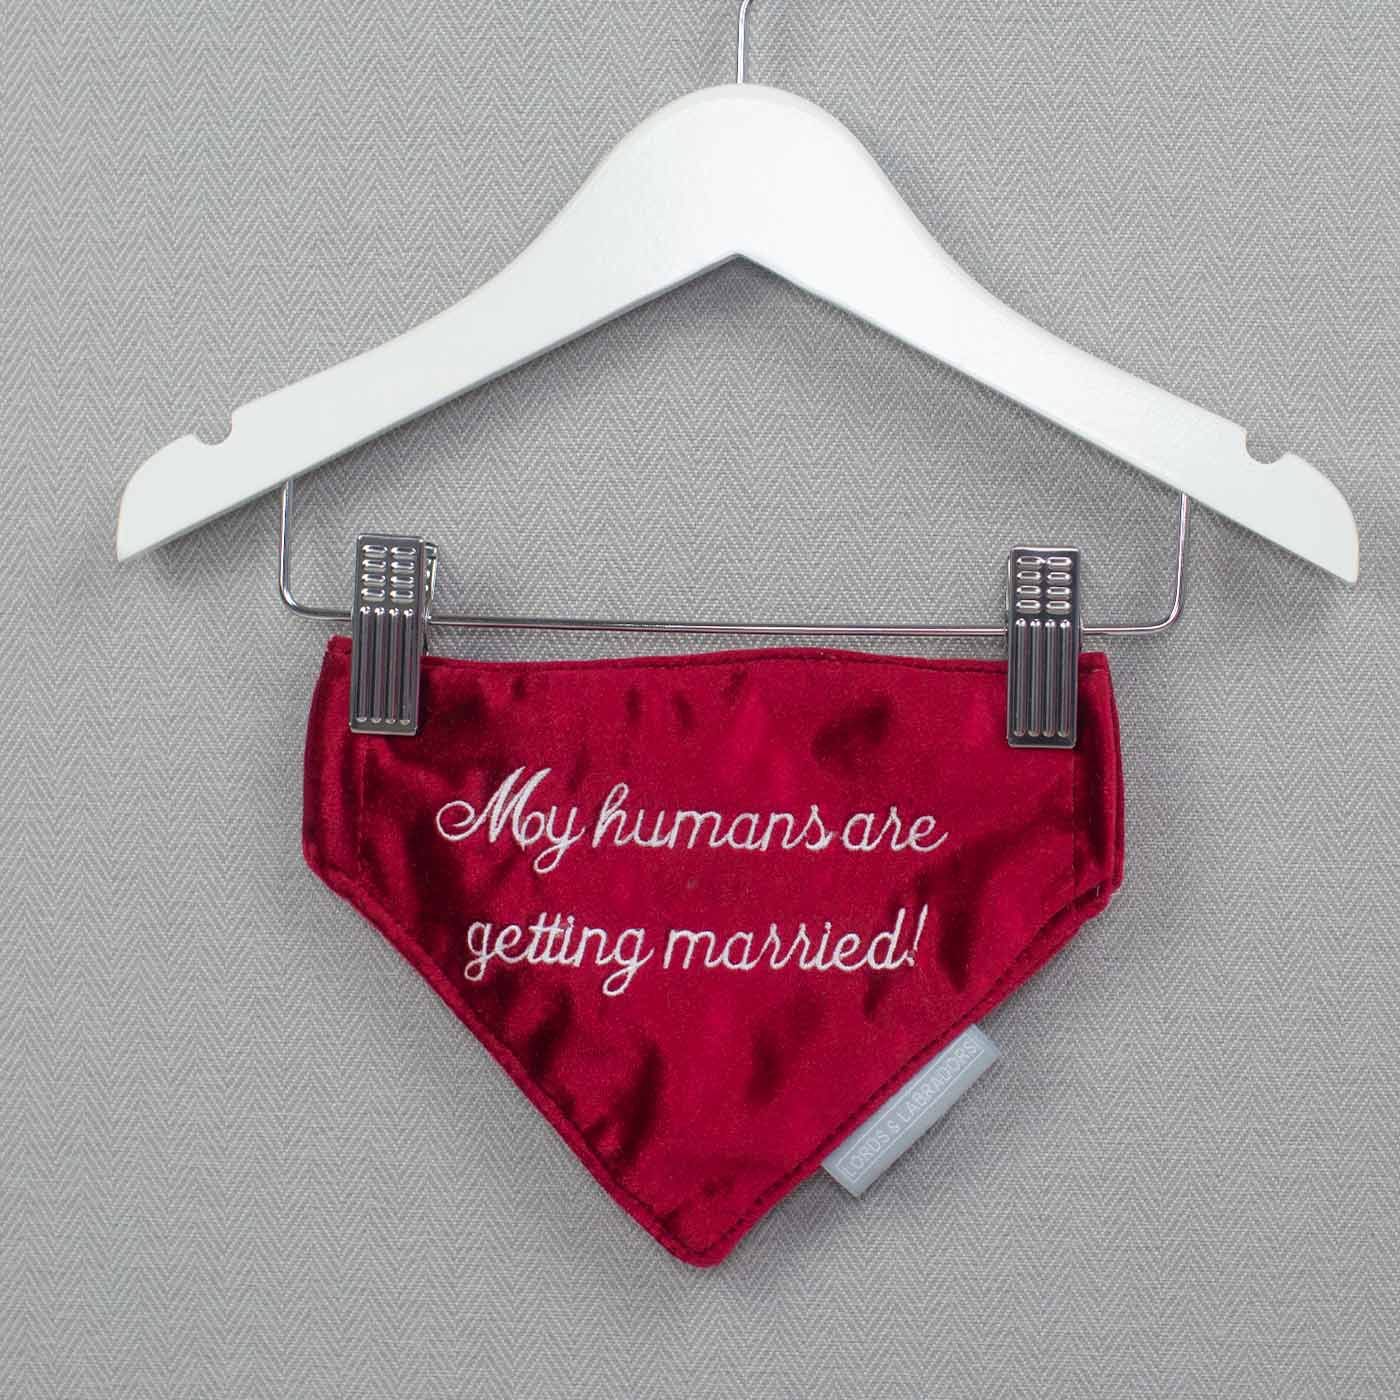 Discover The Perfect Bandana For Dogs, 'My Humans Are Getting Married' Valentine Dog Bandana In Luxury Cranberry Velvet, Available Now at Lords & Labradors